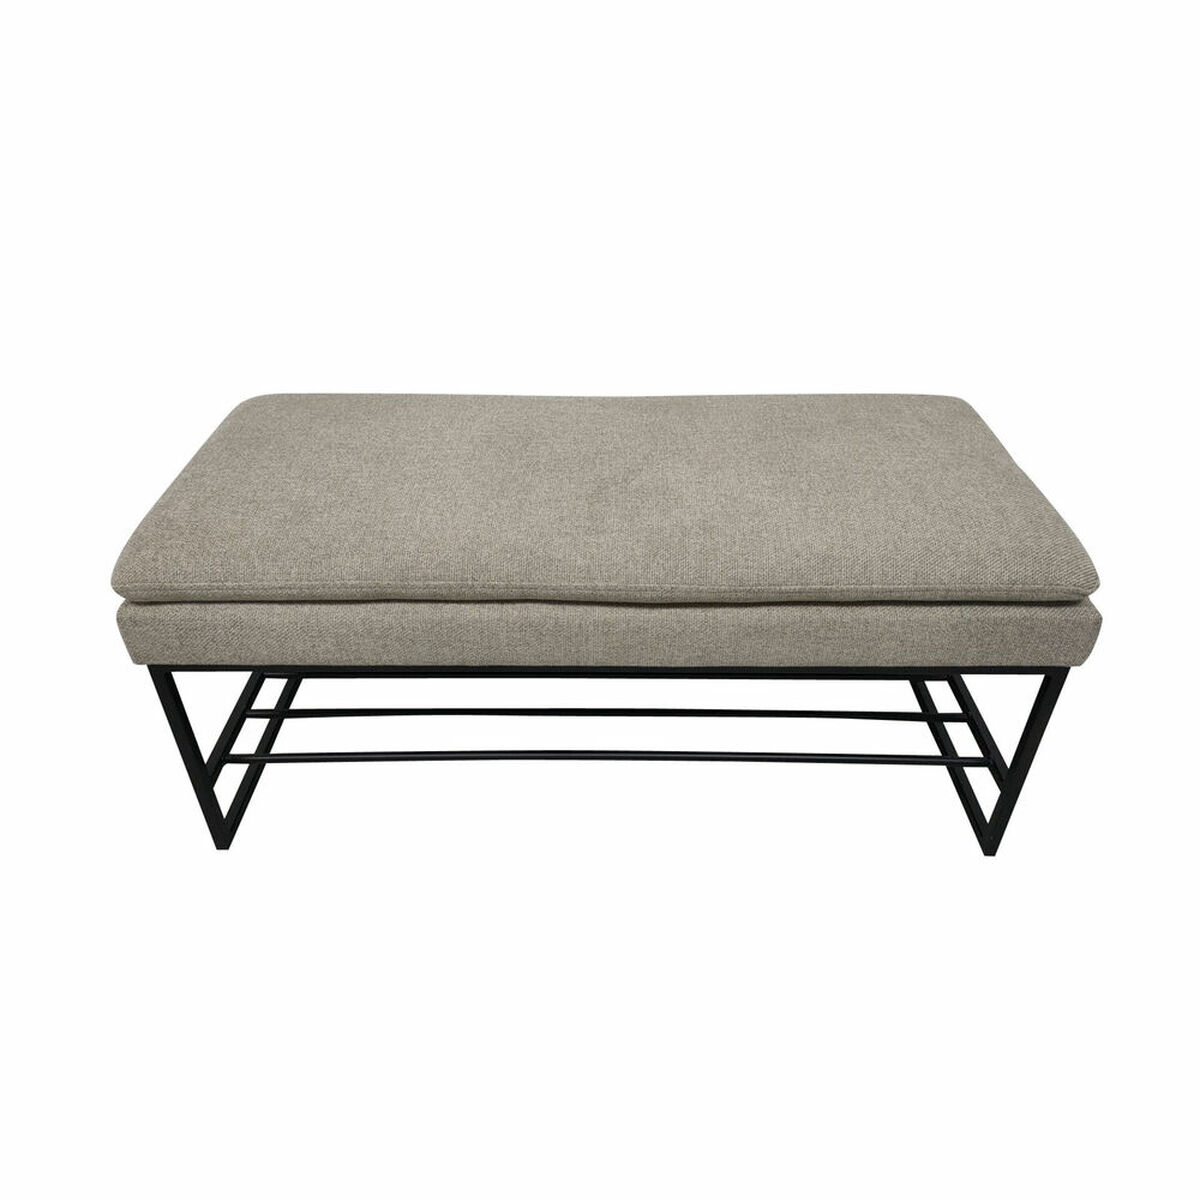 Foot-of-bed Bench DKD Home Decor Black Beige Polyester Iron (80 x 36 x 35 cm)